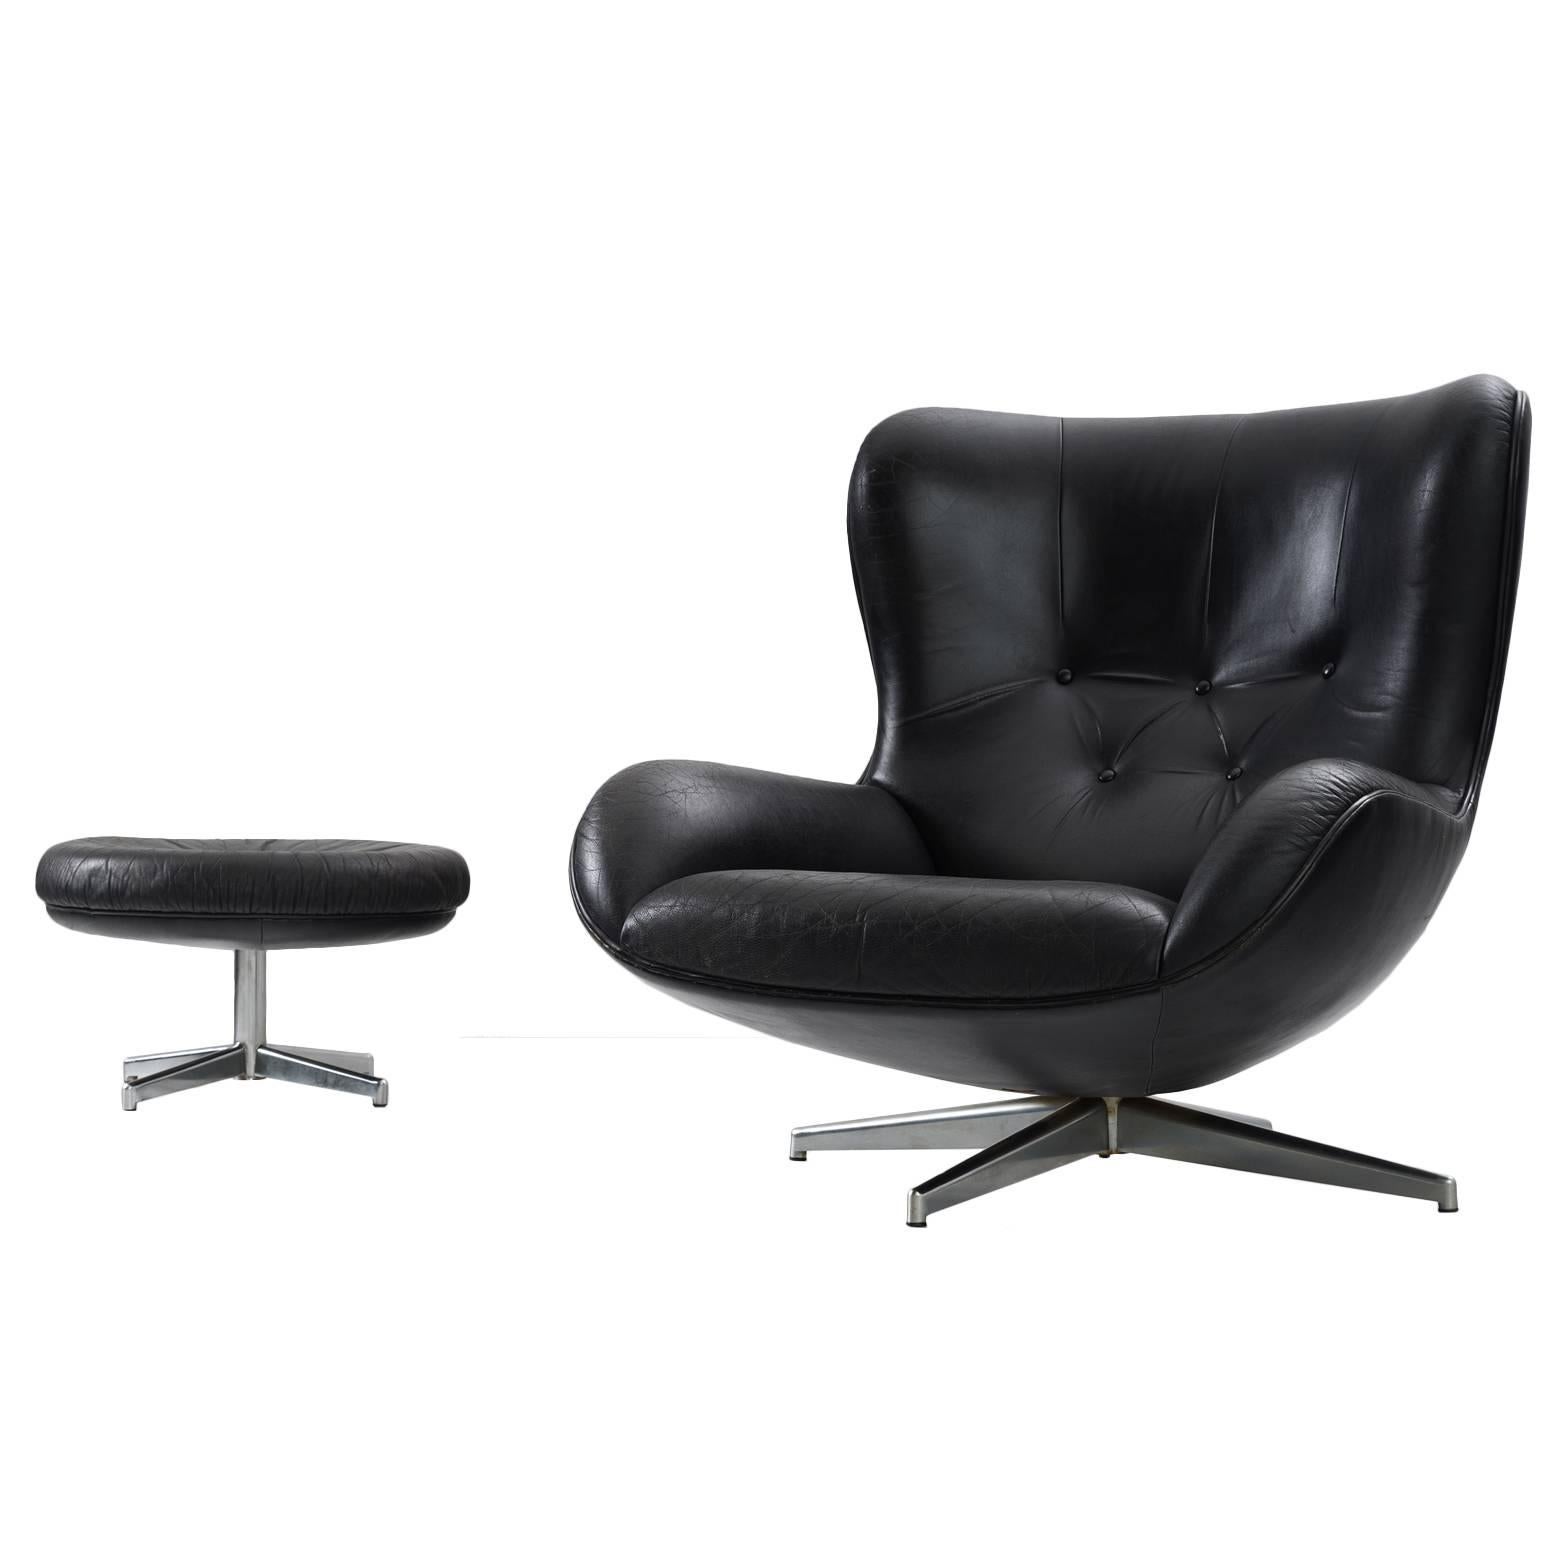 Illum Wikkelsø Lounge Chair and Ottoman in Black Leather